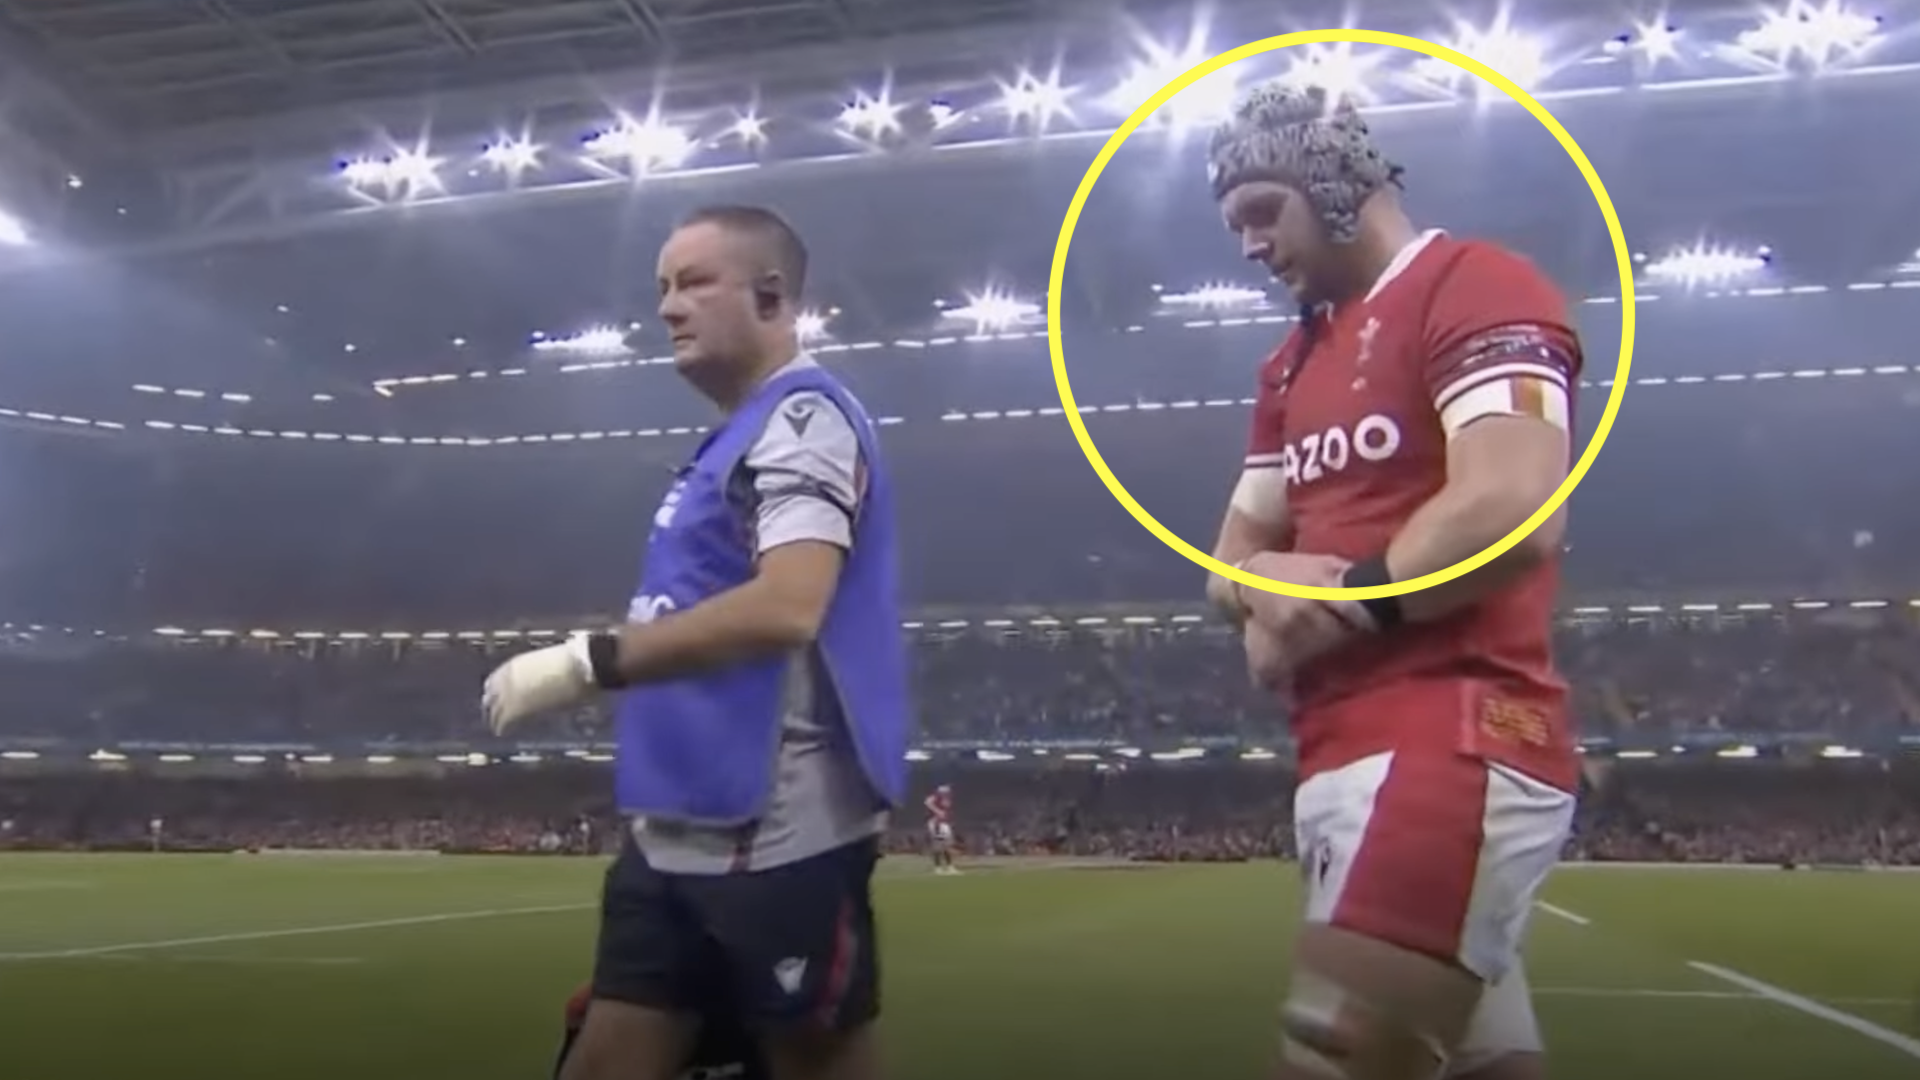 Wales flanker shares update after latest injury